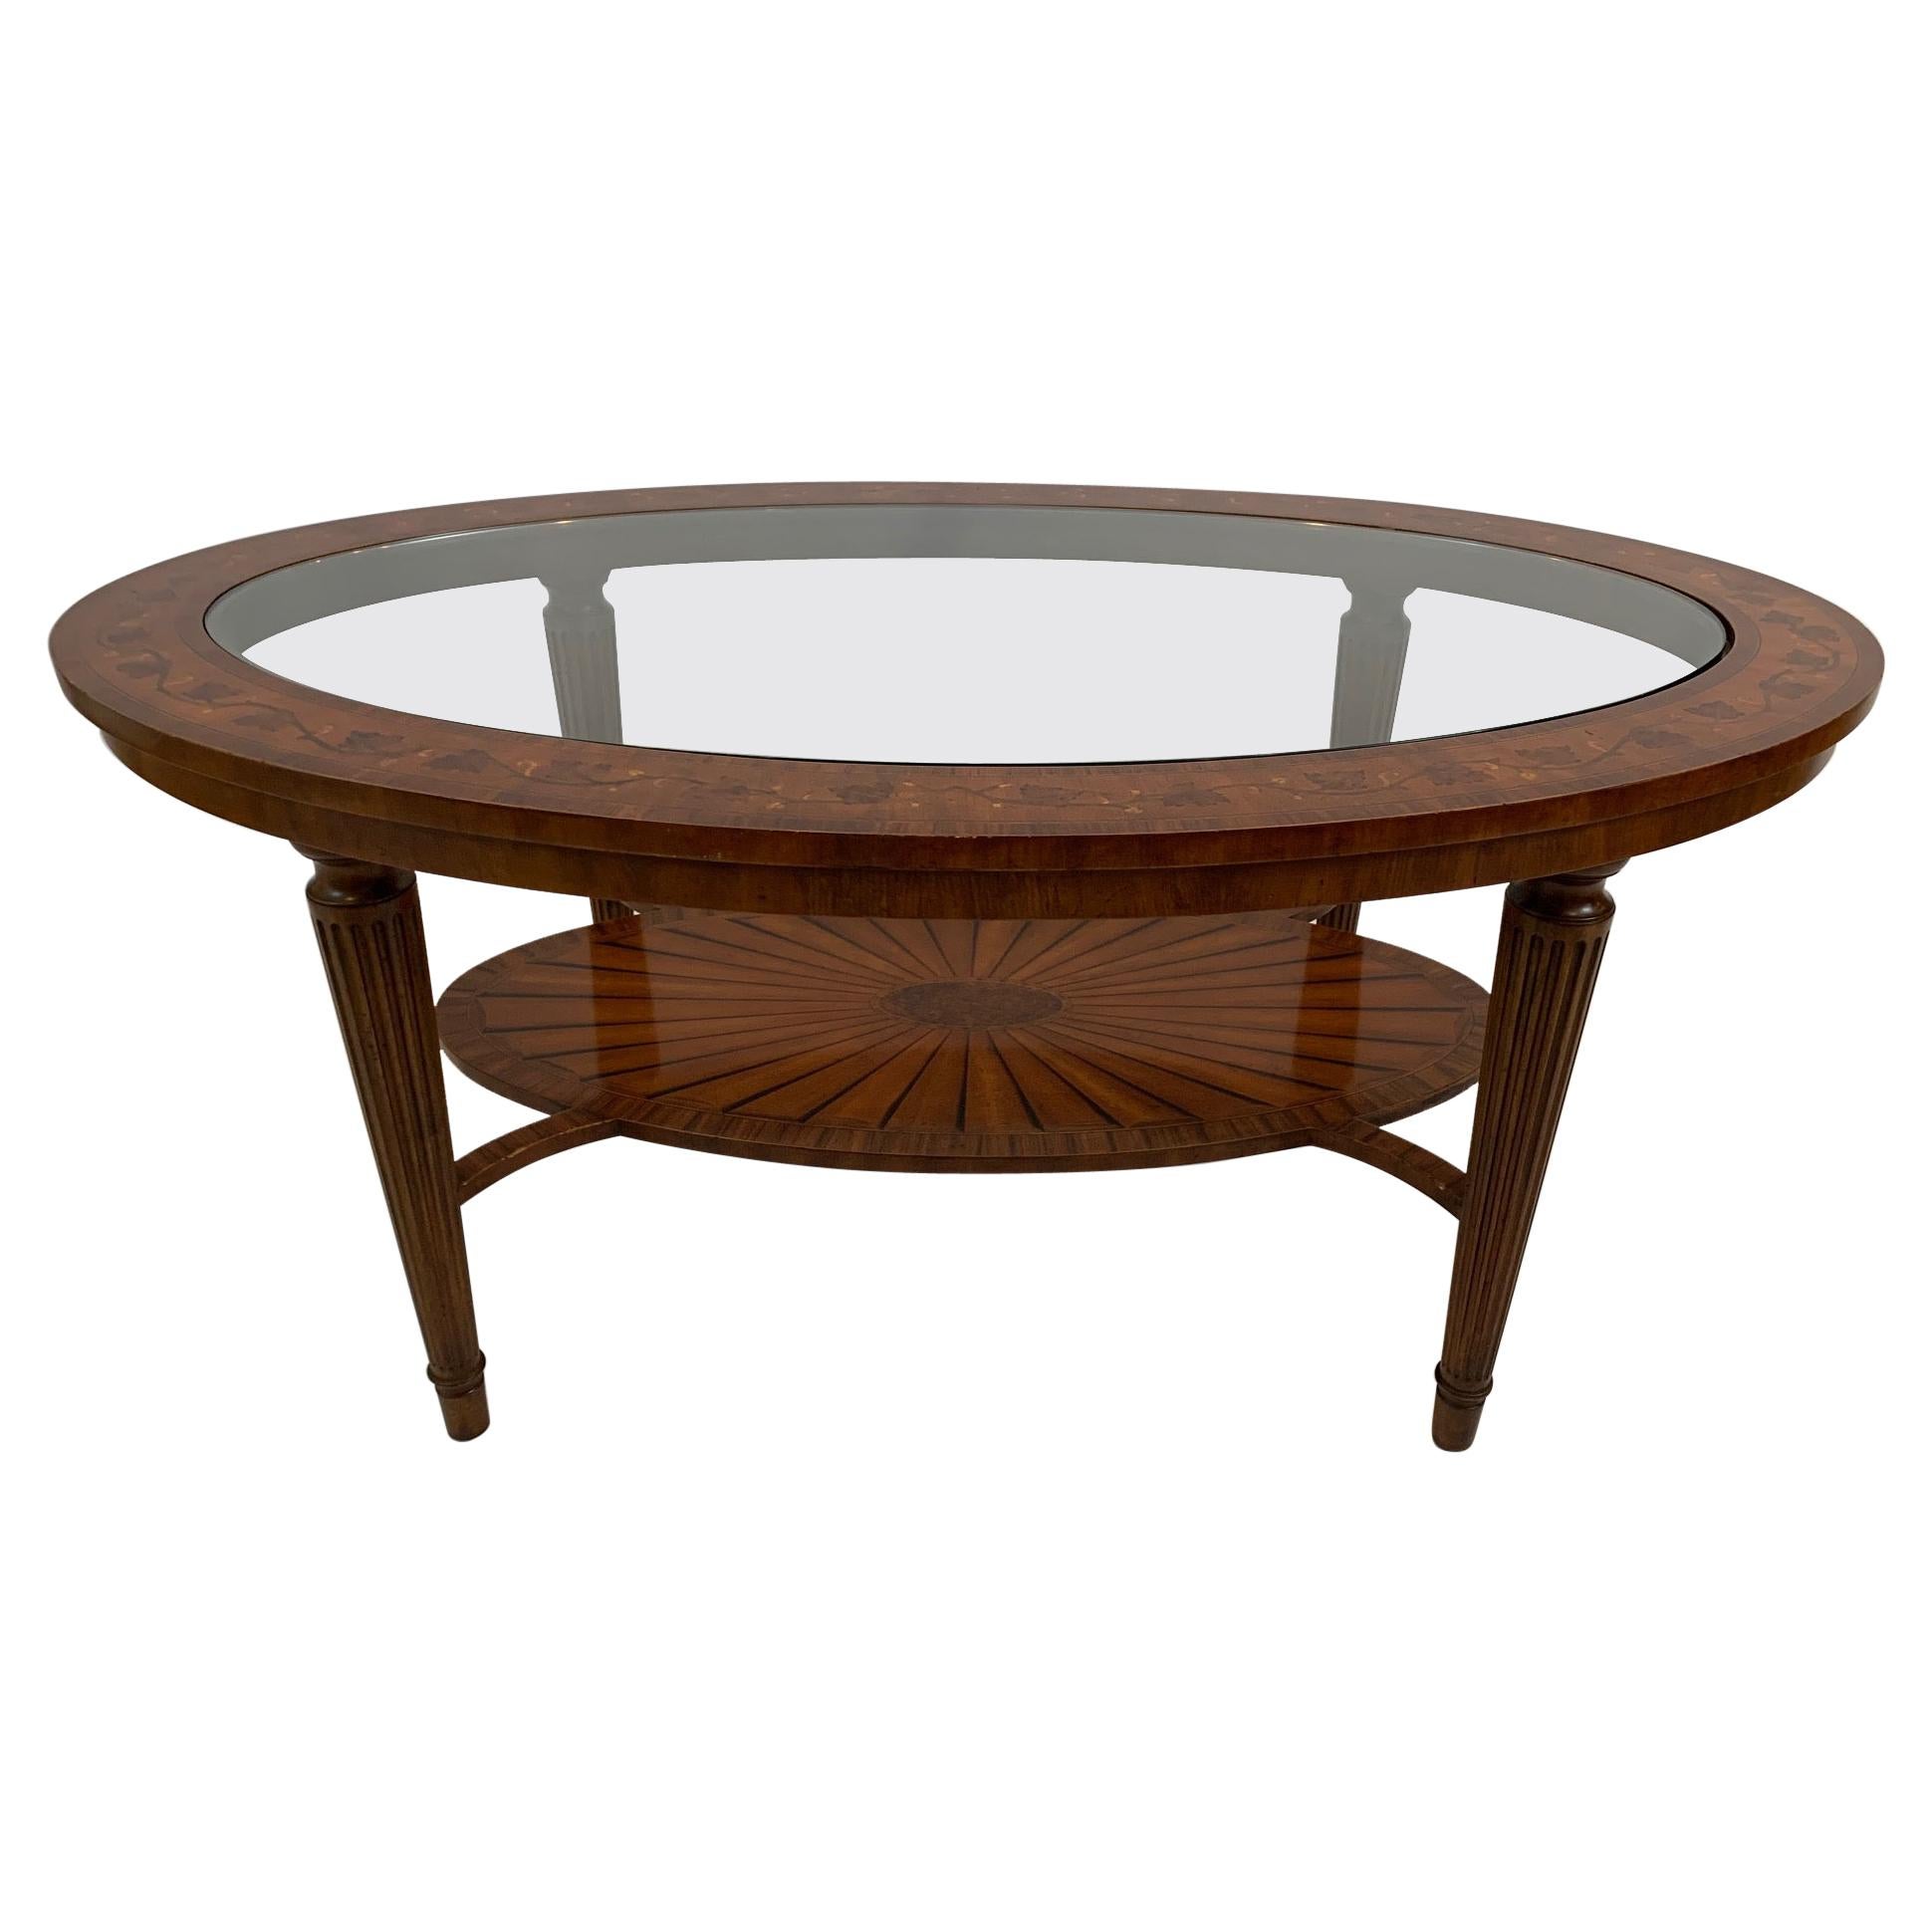 Gorgeous Oval Mixed Inlaid Wood & Glass Coffee Table